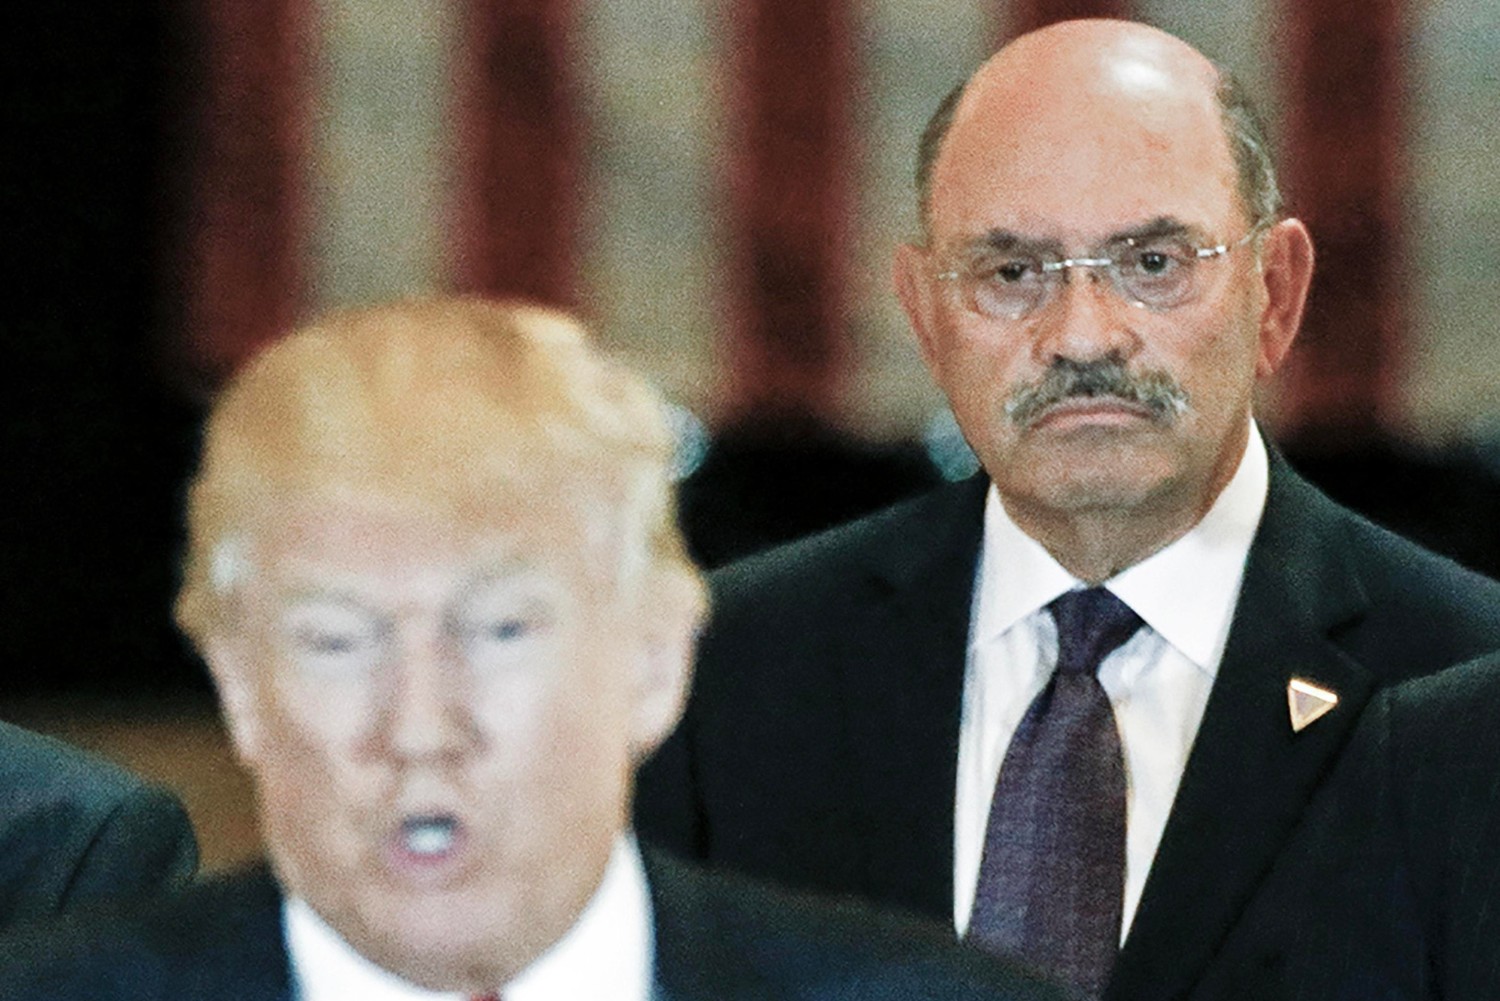 Trump Organization chief financial officer Allen Weisselberg looks on as then-U.S. Republican presidential candidate Donald Trump speaks during a news conference at Trump Tower in Manhattan in 2016. REUTERS/Carlo Allegri - RC2BAO96JT05 REUTERS